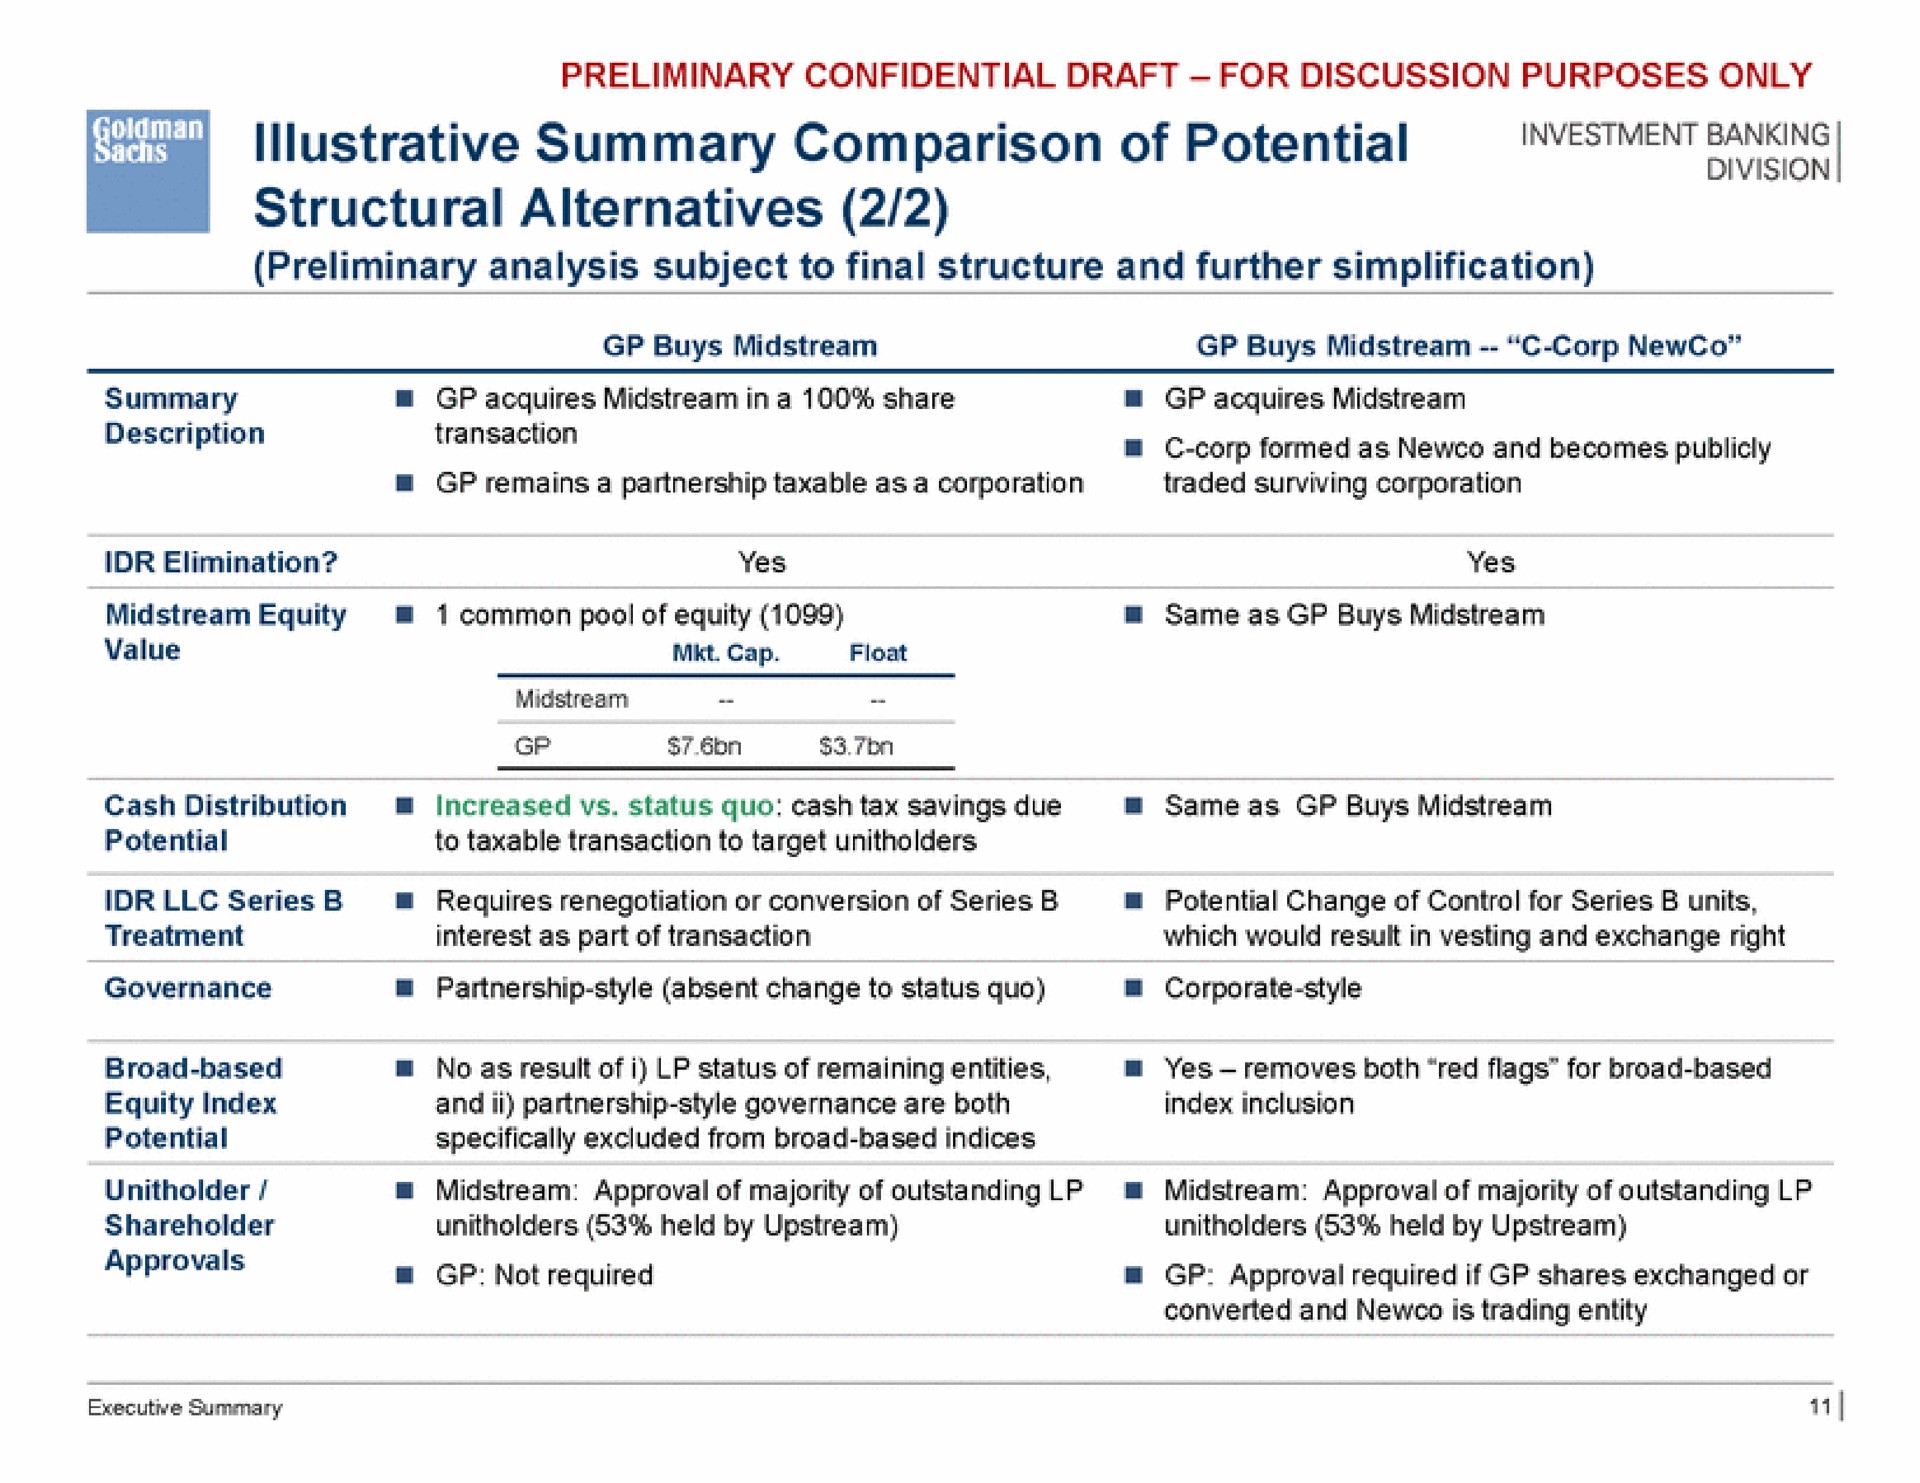 sal illustrative summary comparison of potential structural alternatives preliminary analysis subject to final structure and further simplification | Goldman Sachs